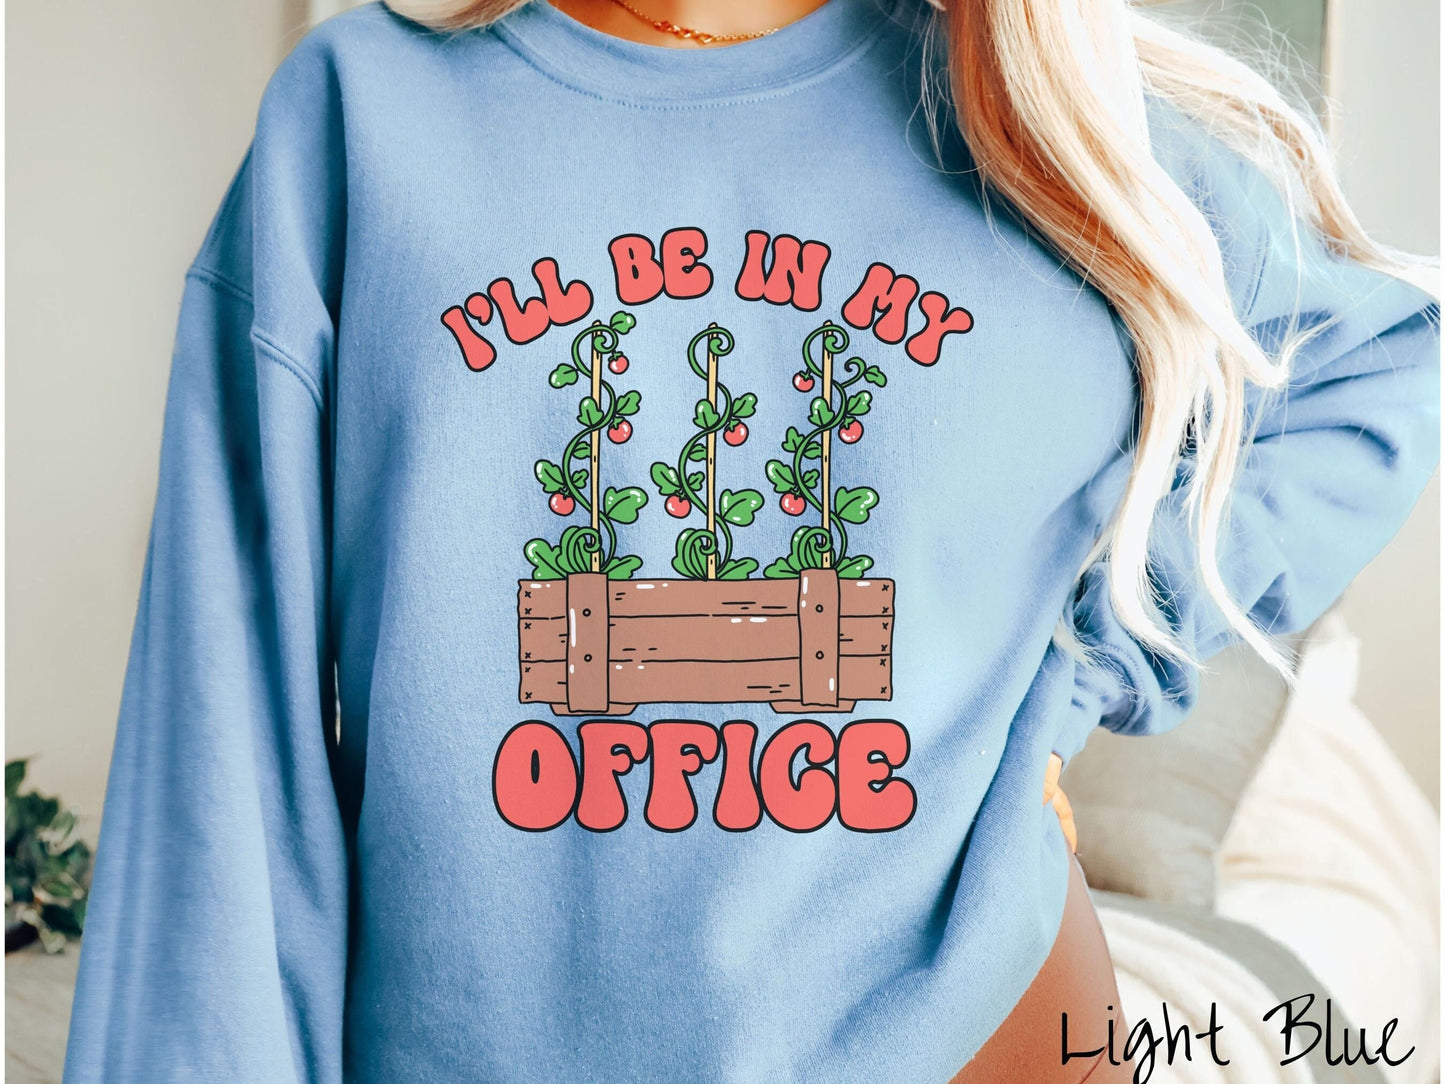 A woman wearing a cute, vintage light blue colored comfy sweatshirt with the text I’ll Be in My Office in red font across the front. In between the text is a wooden plant holder with three tomato vines sprouting tomatoes climbing upwards.